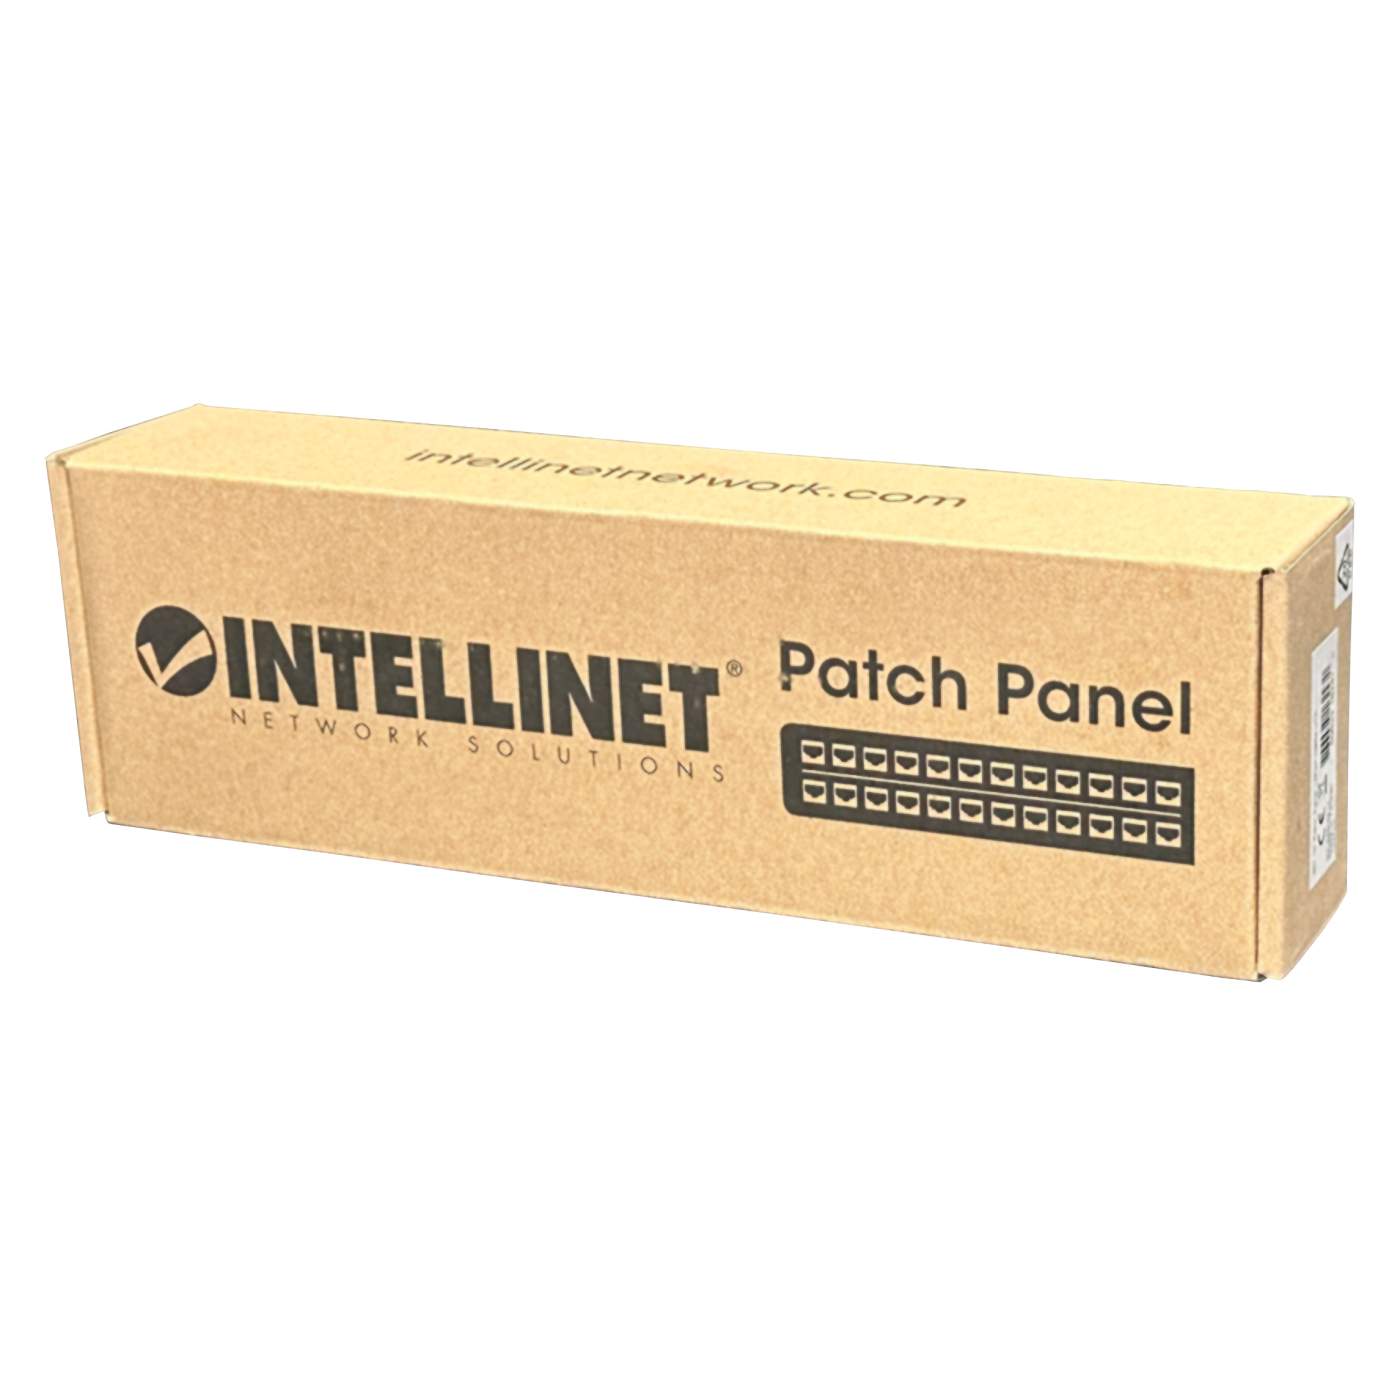 Cat5e Wall-mount Patch Panel Packaging Image 2